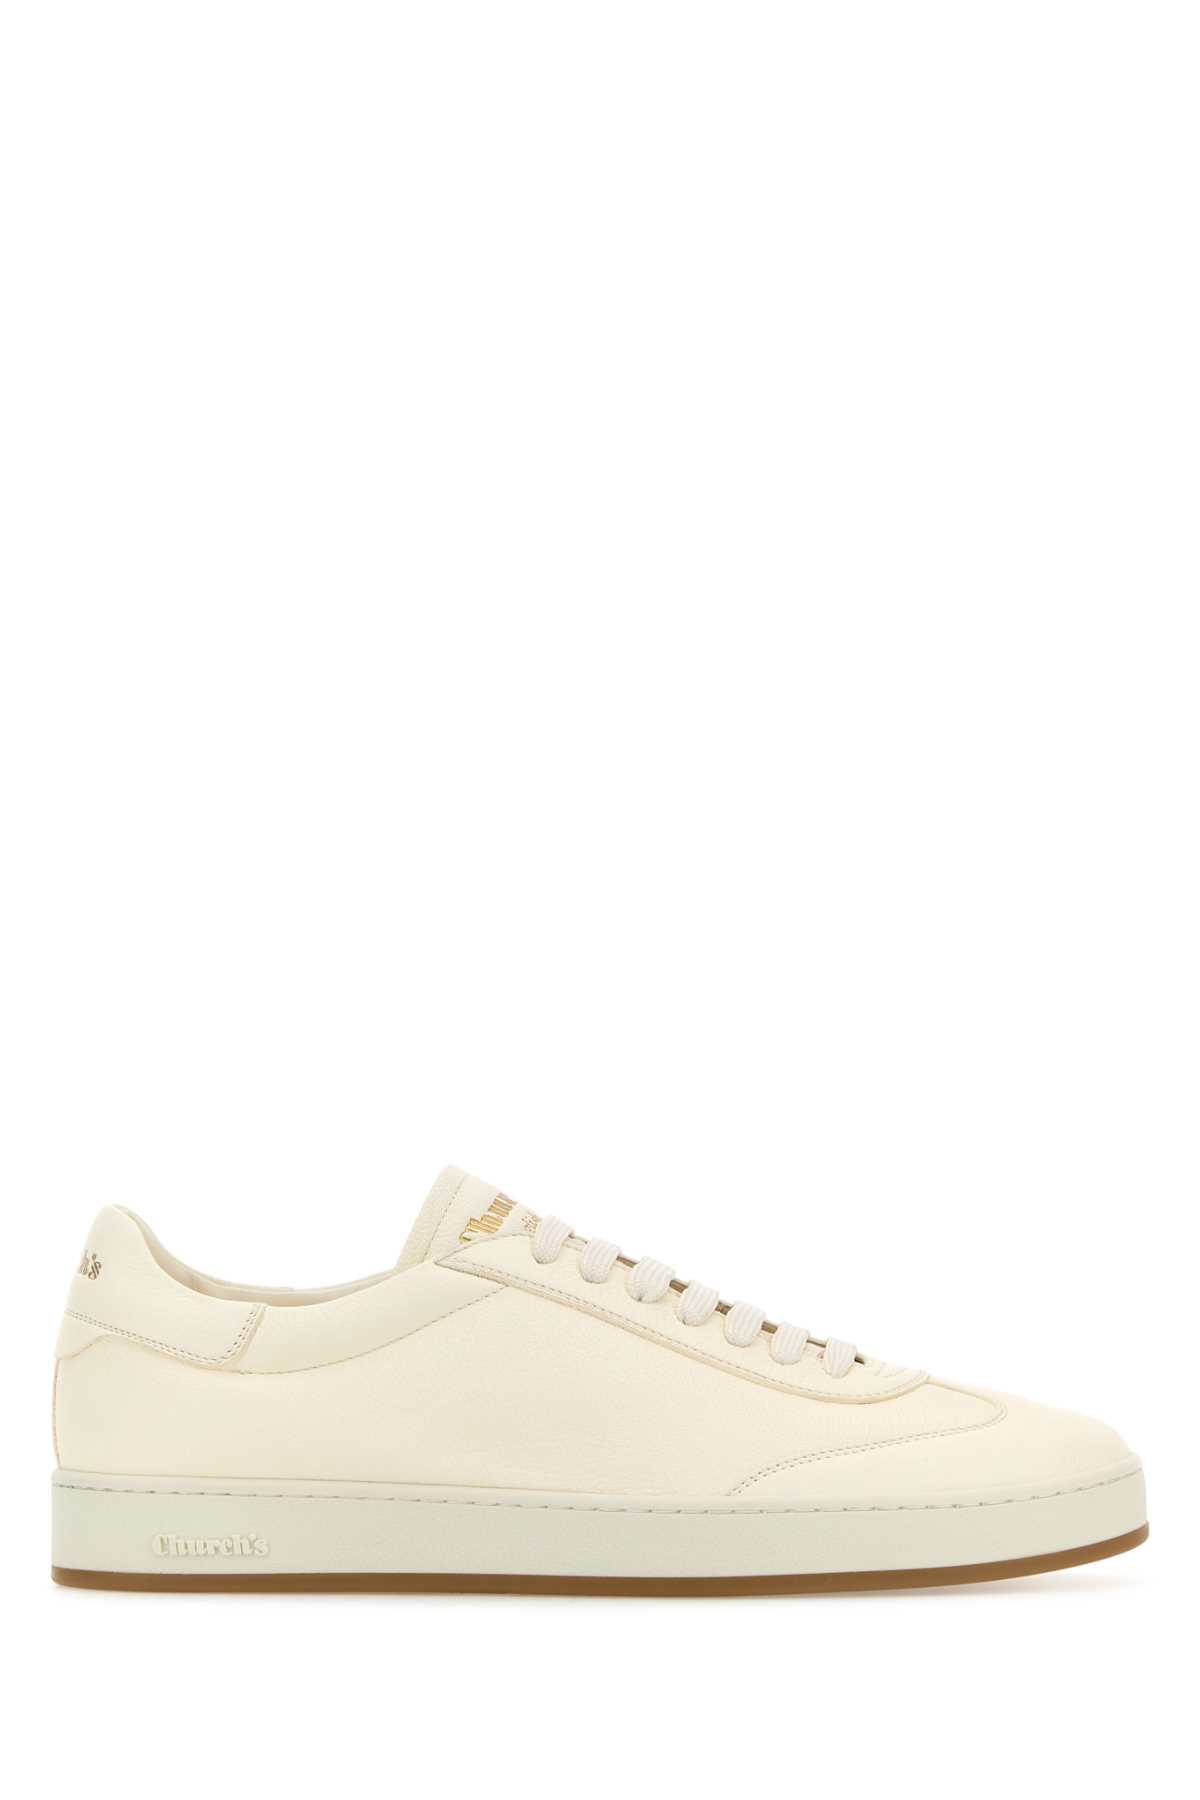 Ivory Leather Largs Sneakers